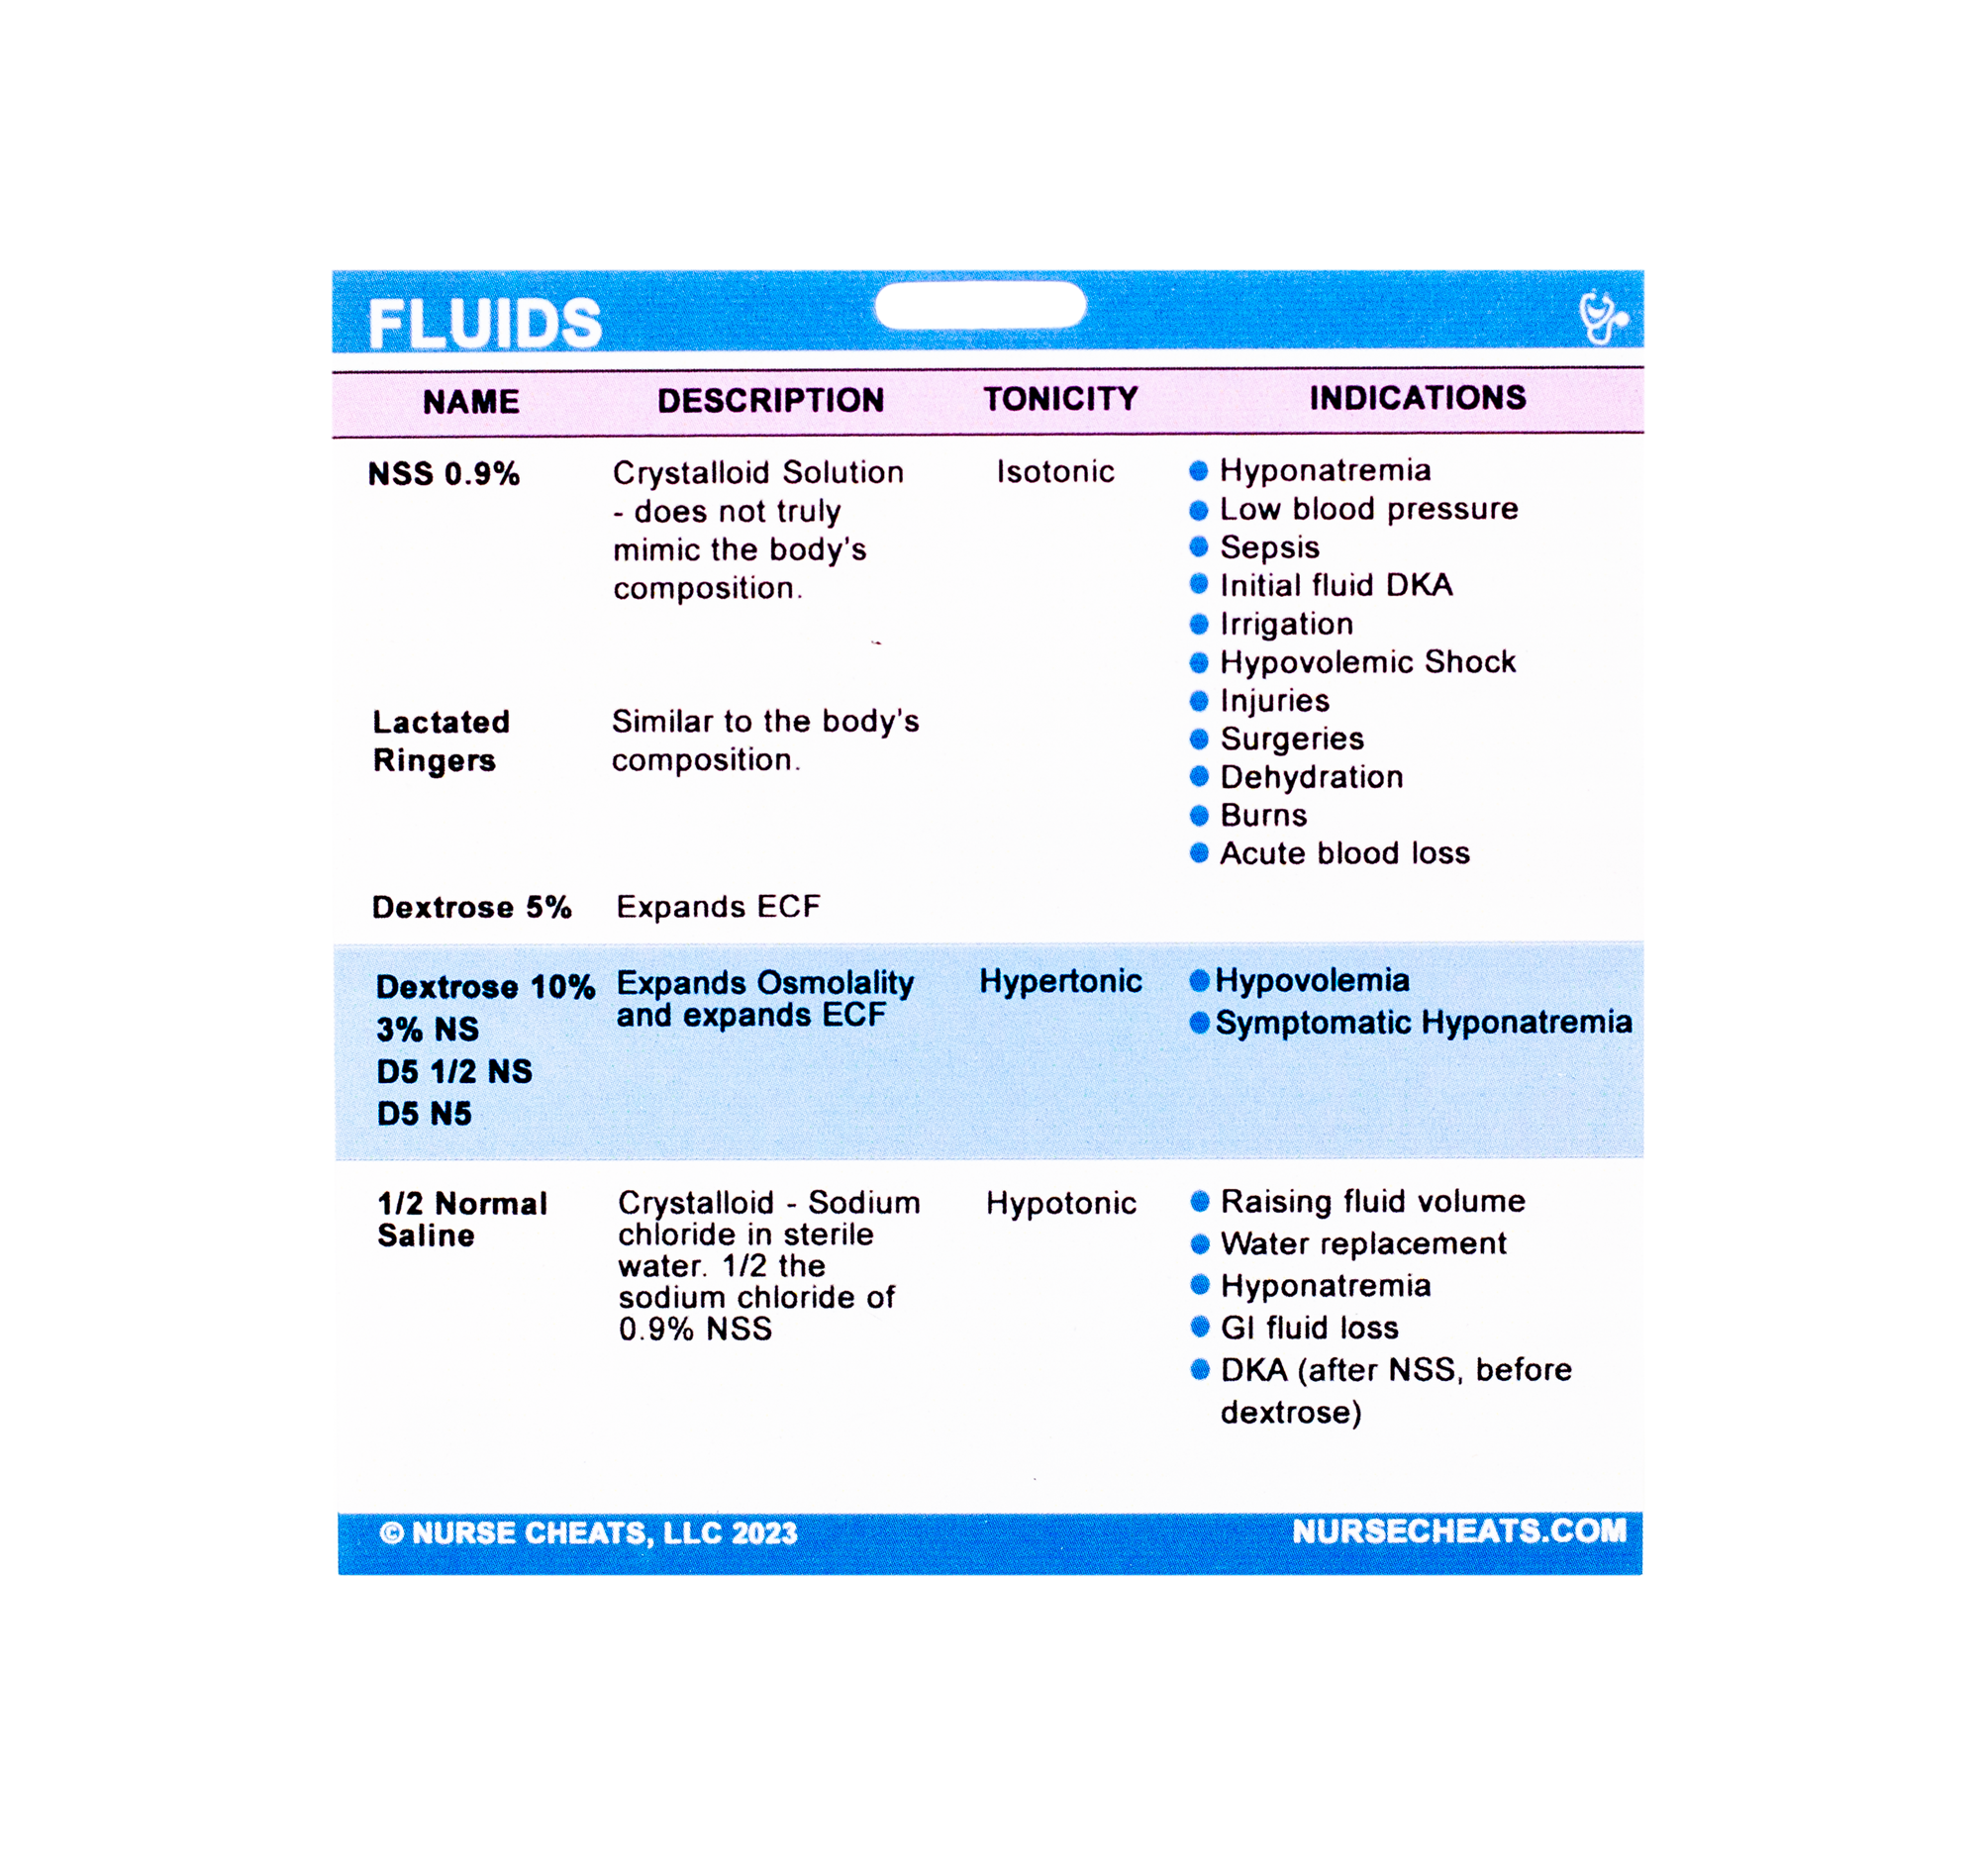 Side 1 of our fluid badge buddy contains the most common fluids used in nursing practice along with their indications and tonicity.  